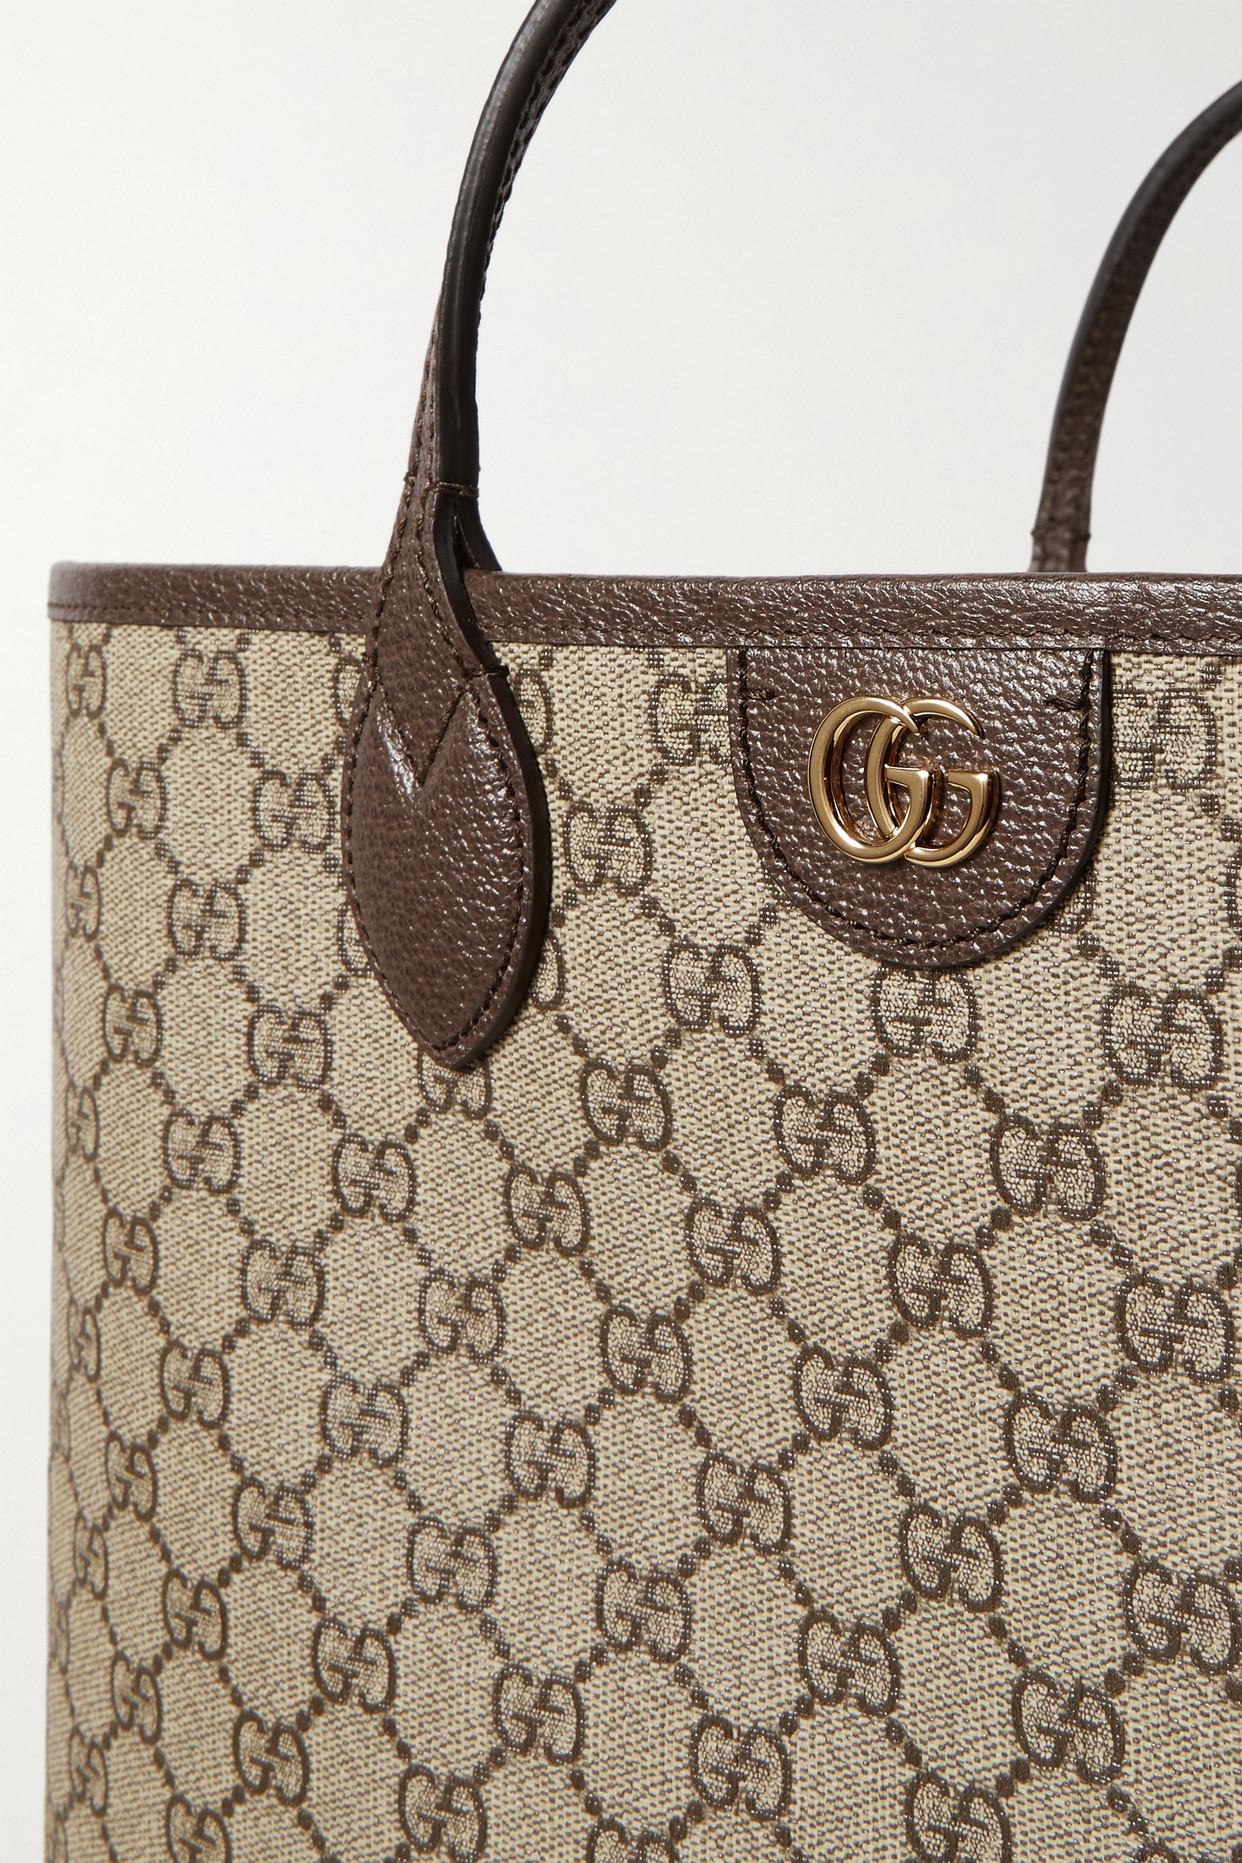 GUCCI Ophidia textured leather-trimmed printed coated-canvas tote